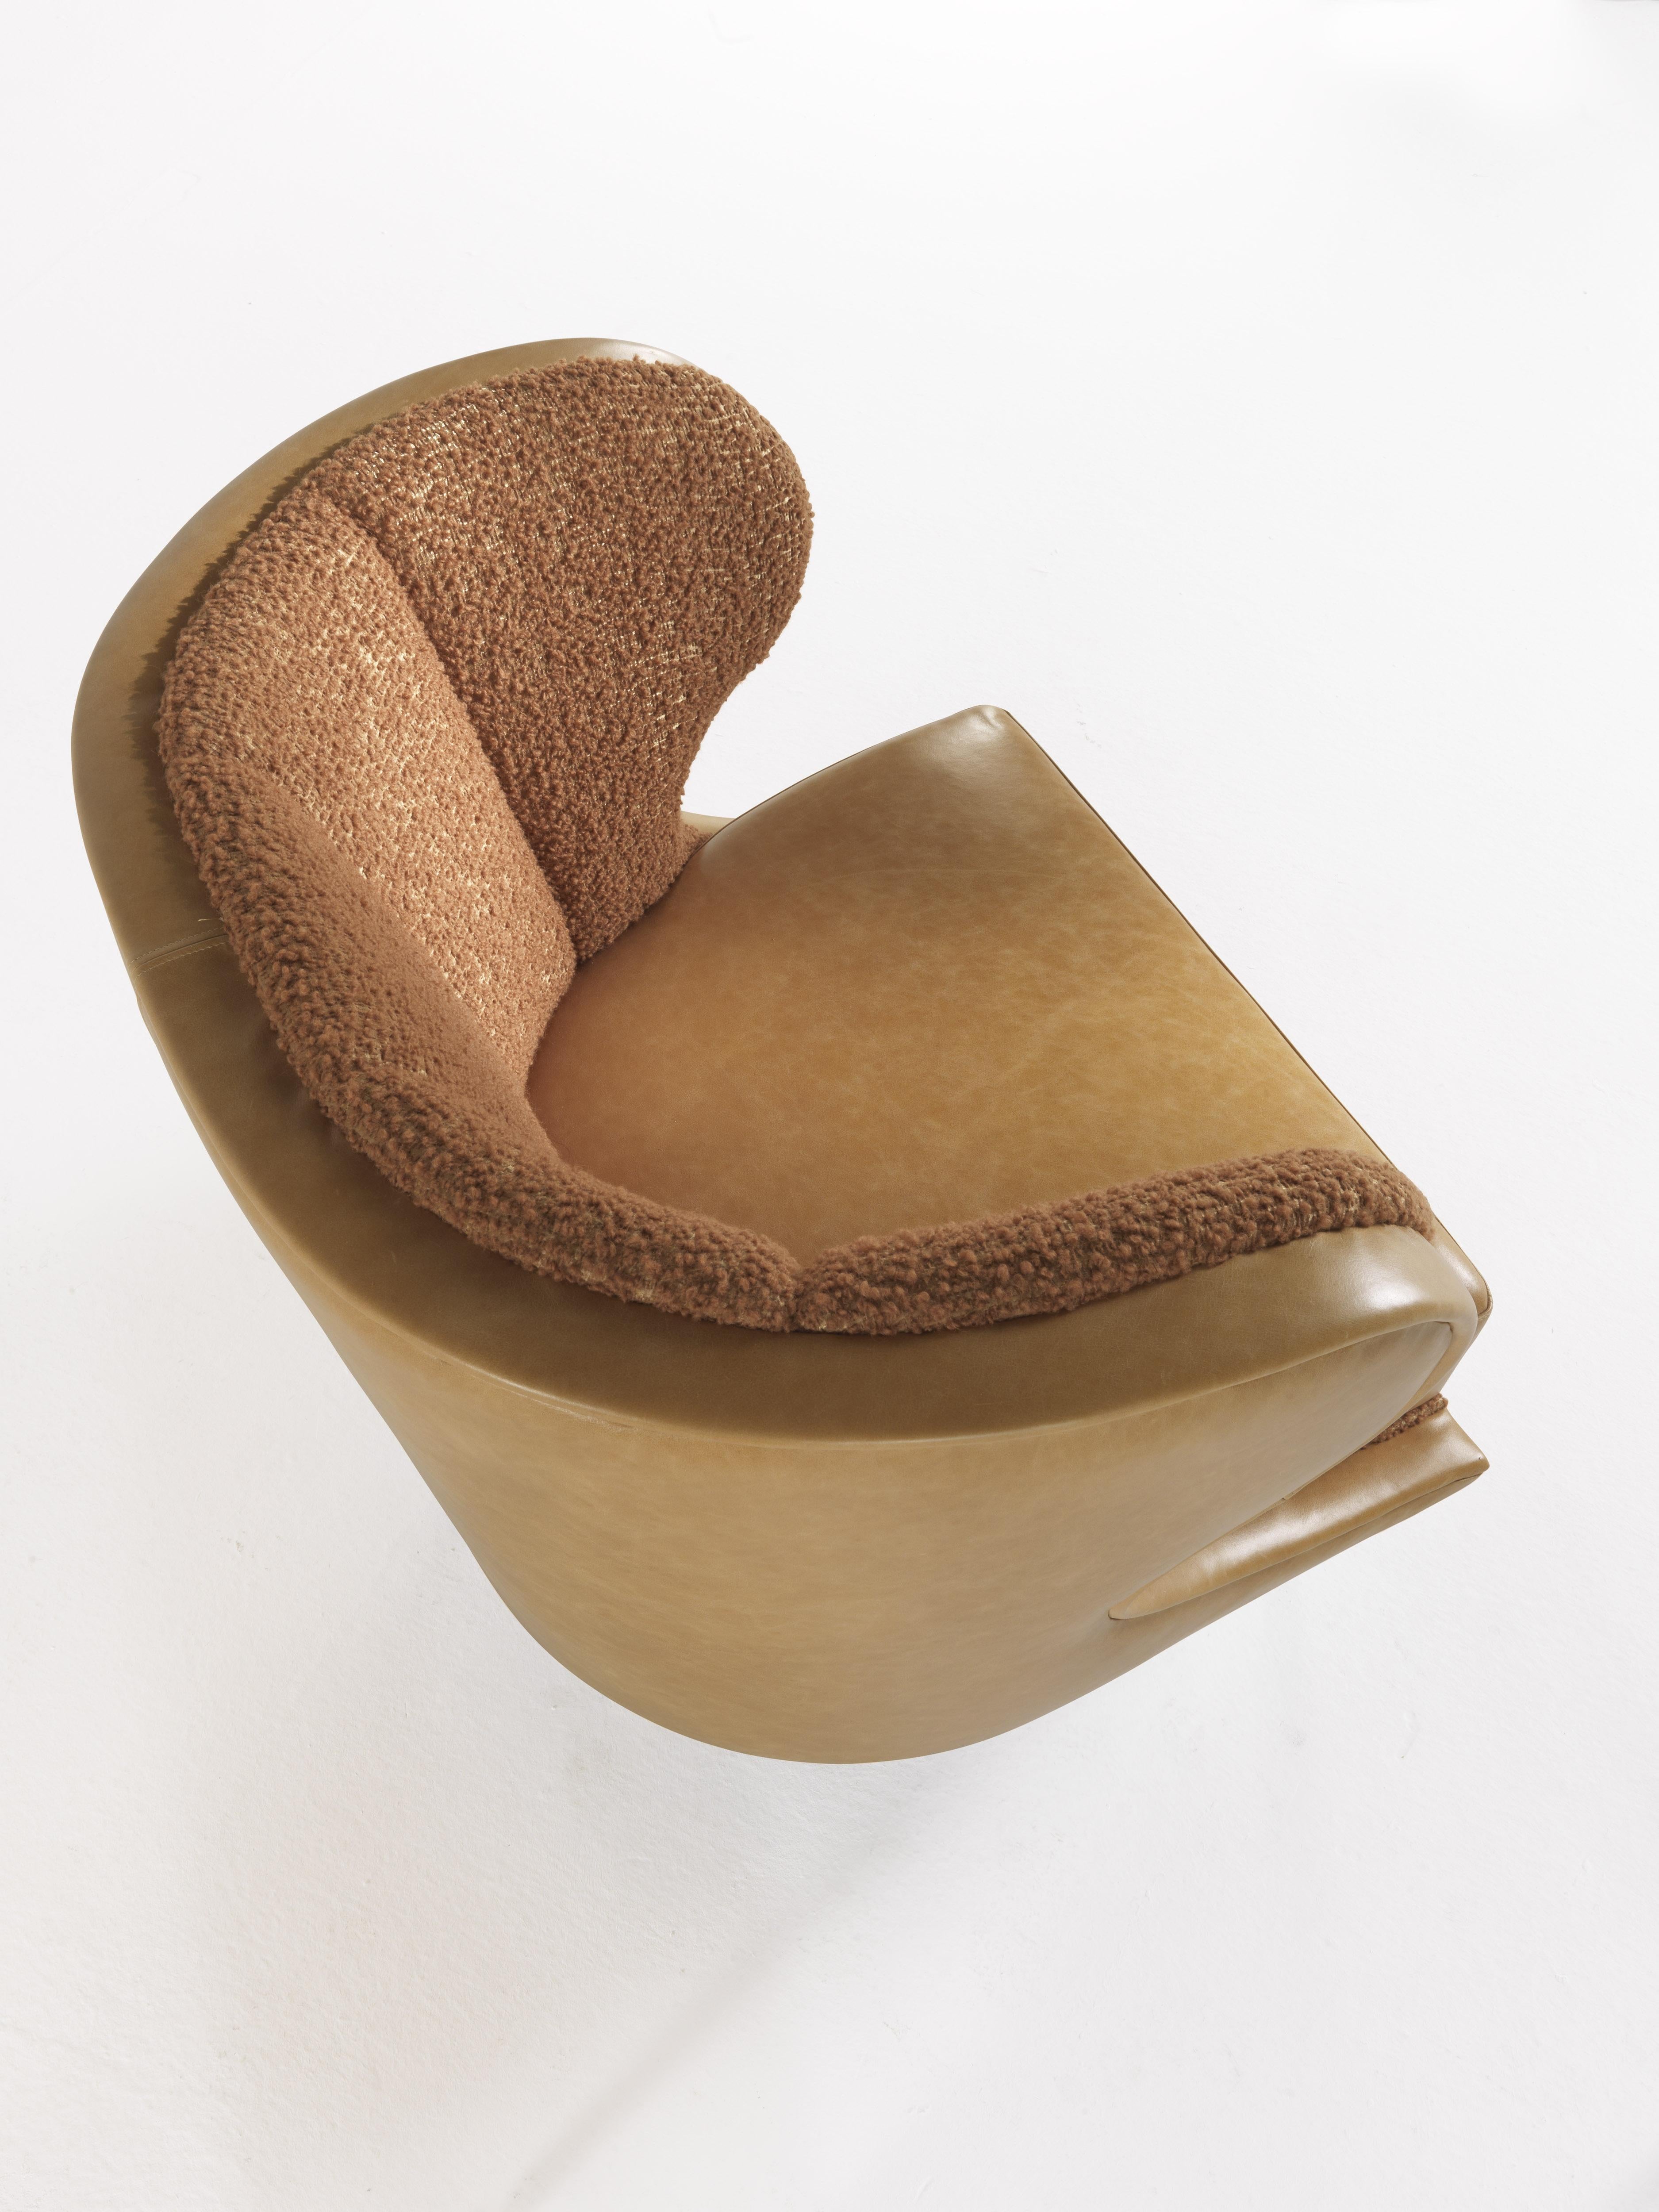 Modern Gianfranco Ferré Home Dunlop Armchair in Bronze Boucle Wool fabric For Sale